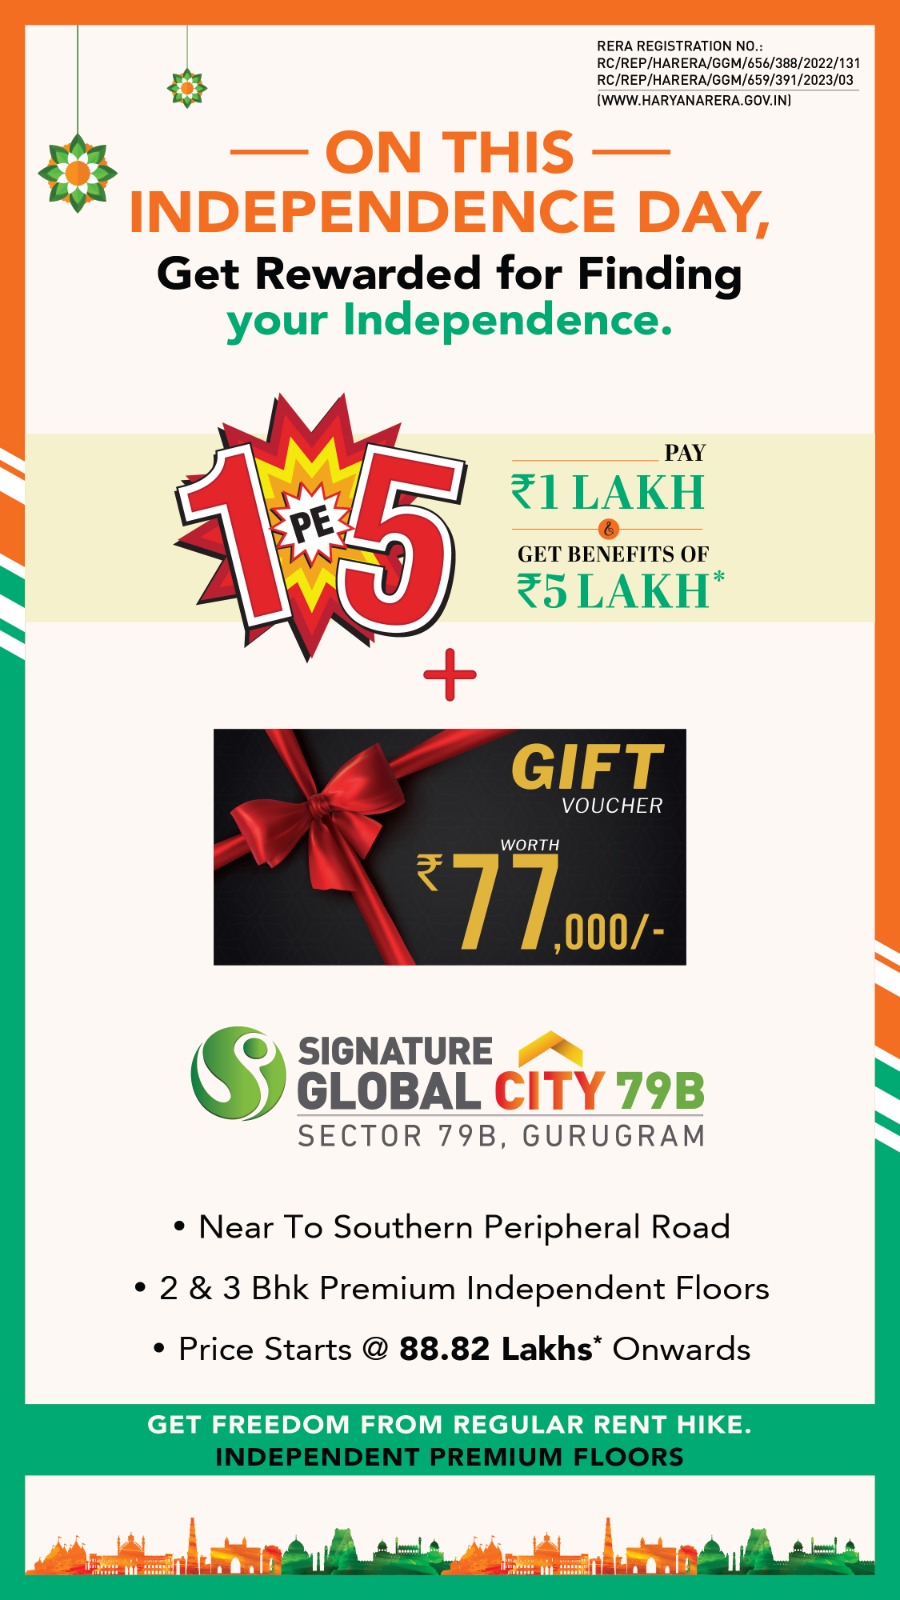 On this Independence Day, Get rewarded foe asserting  your indenpendence at Signature Global City 79B, Gurgaon